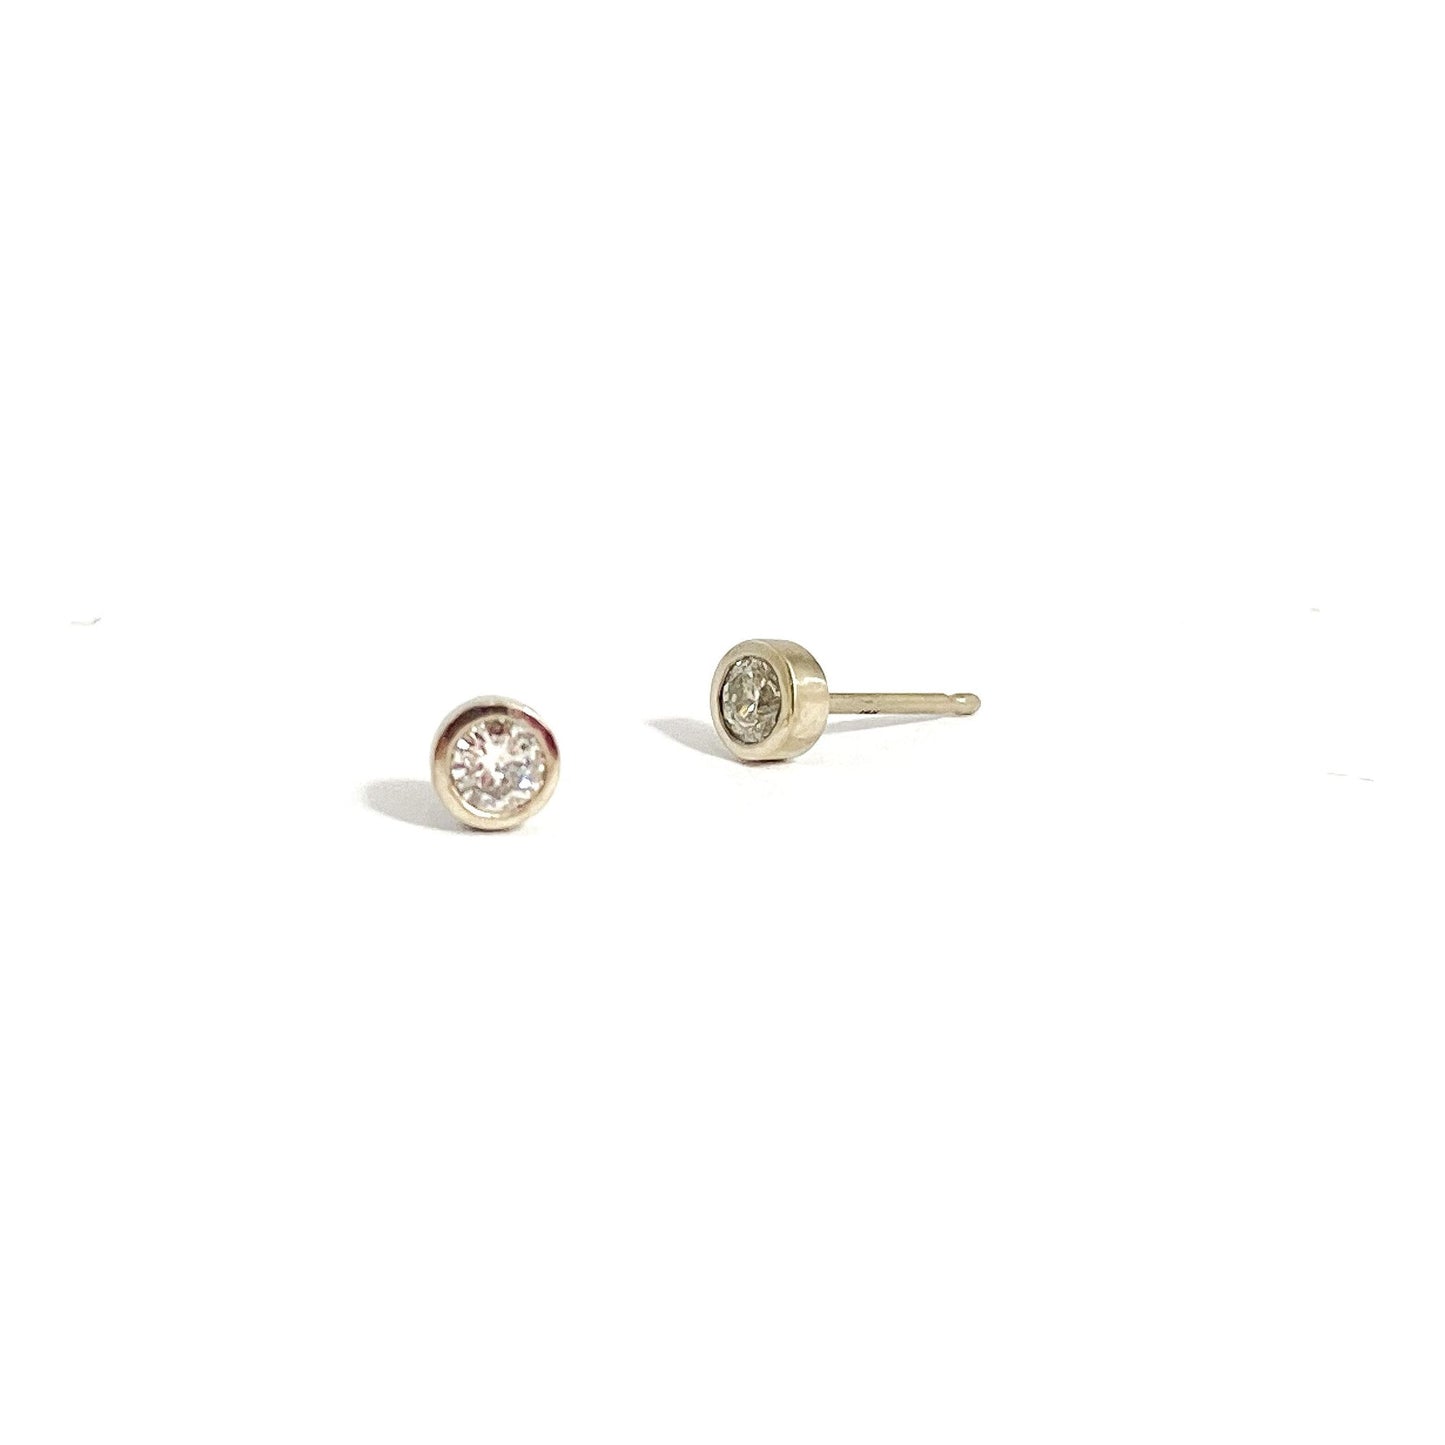 Details.  Indulge in the captivating allure of these 3MM diamond studs. With their sparkling brilliance and timeless elegance, these versatile studs are the perfect accessory to elevate any outfit. Add a touch of luxury to your collection  2 x 3mm Round White Diamond 14k Yellow Gold Each earring measures 4.1mm x 4.15mm butterfly backs Satin Finished or Perfectly polished to a brilliant shine and perfection Beautifully Packaged And Shipped In A Jewelry Gift Box